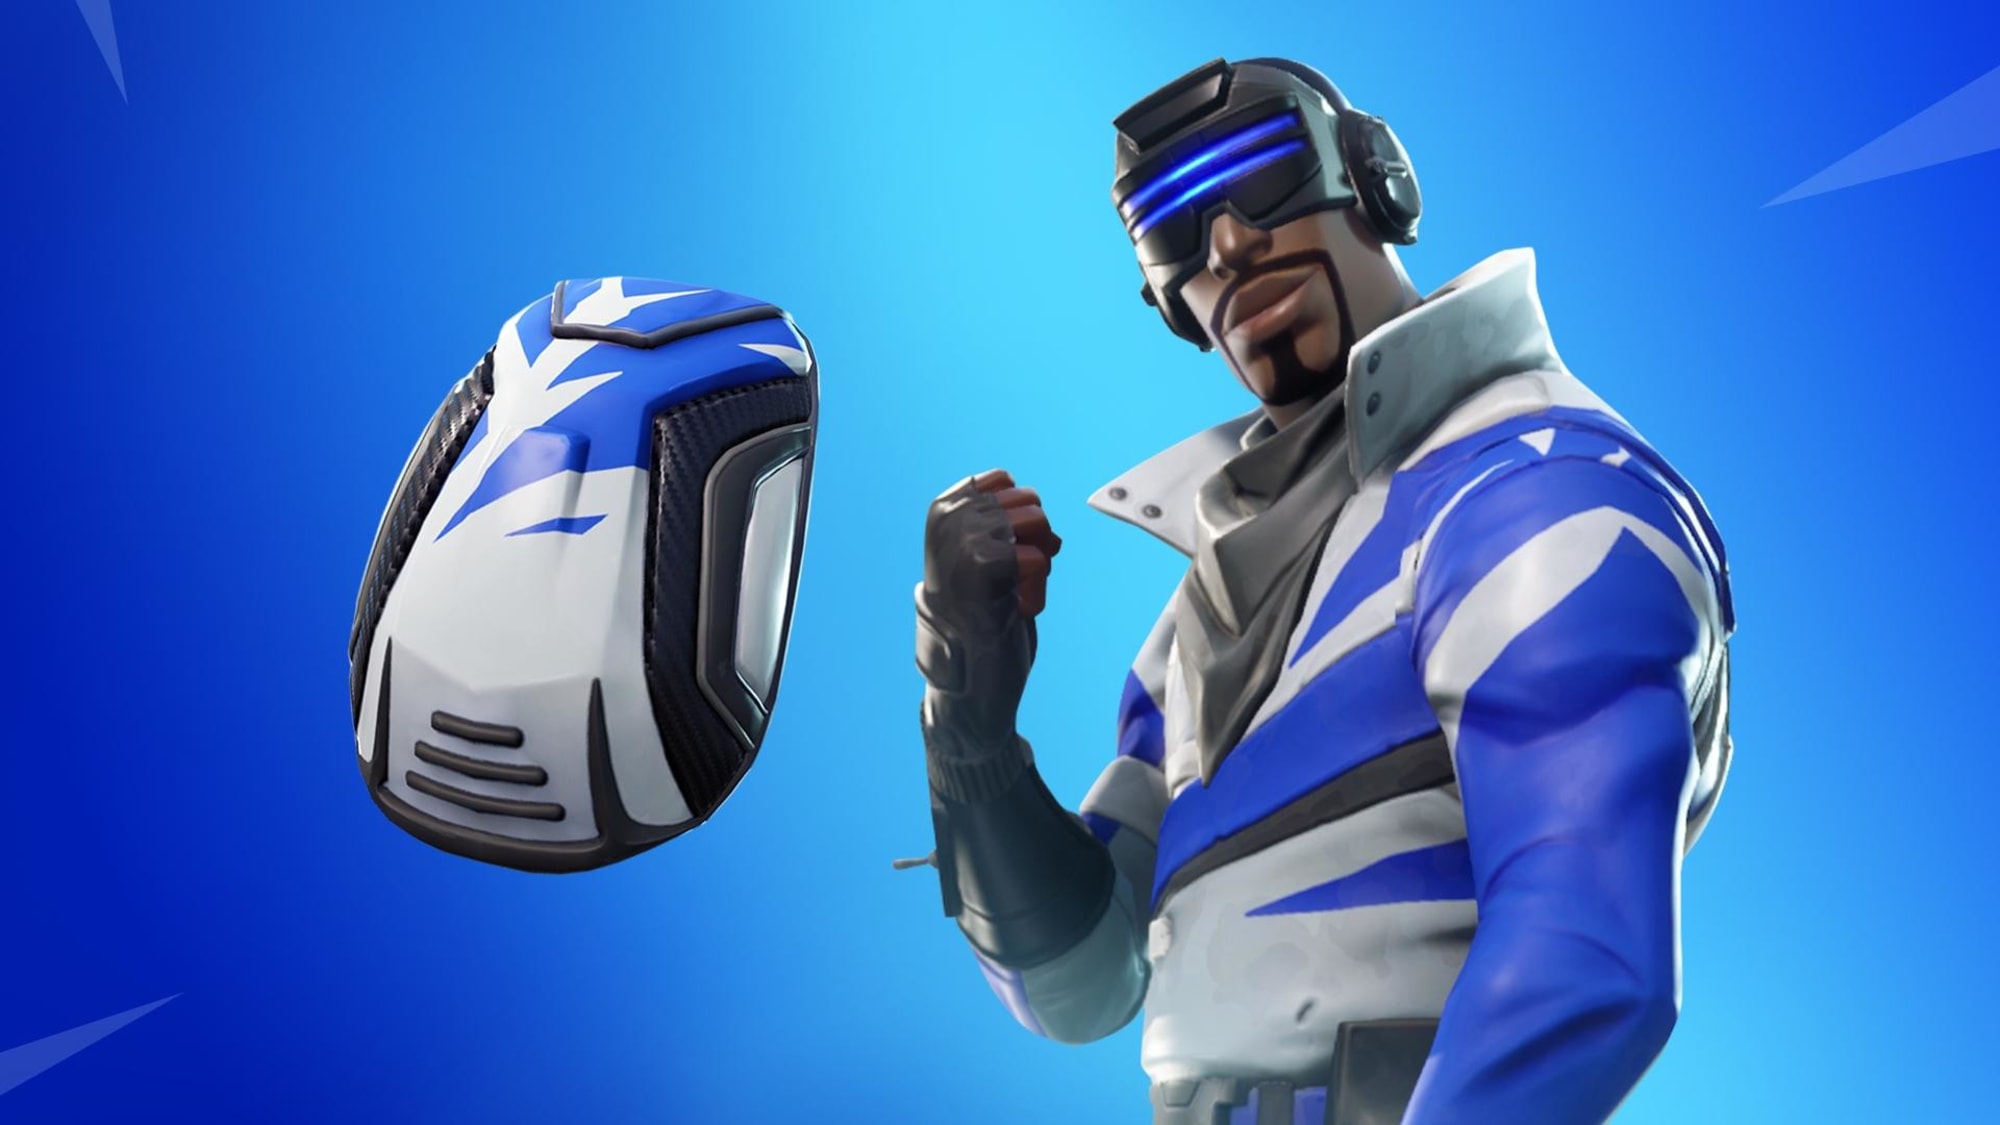 Fortnite Battle Royale The new PlayStation exclusive skin is awesome